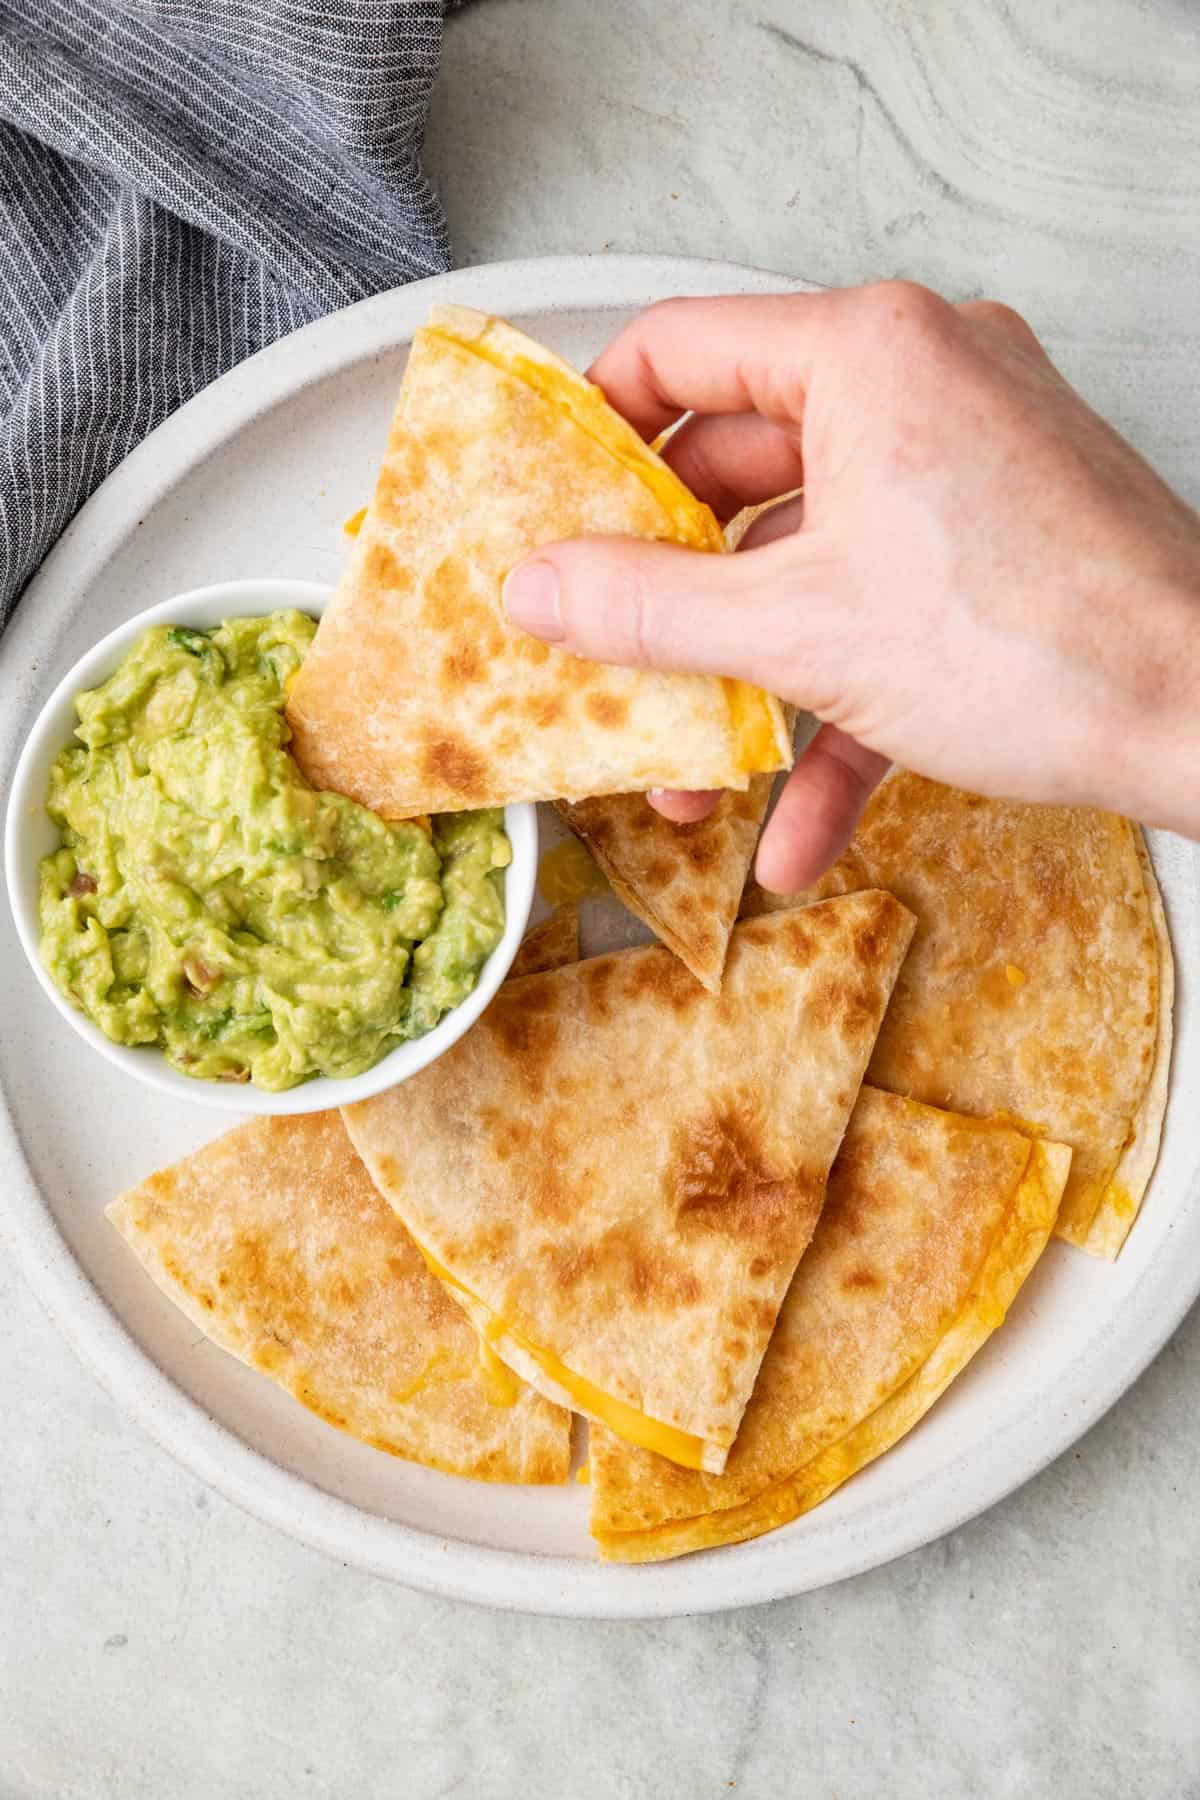 Cheese quesadilla slices on a plate with a side of guacamole with one piece being dipped into it.